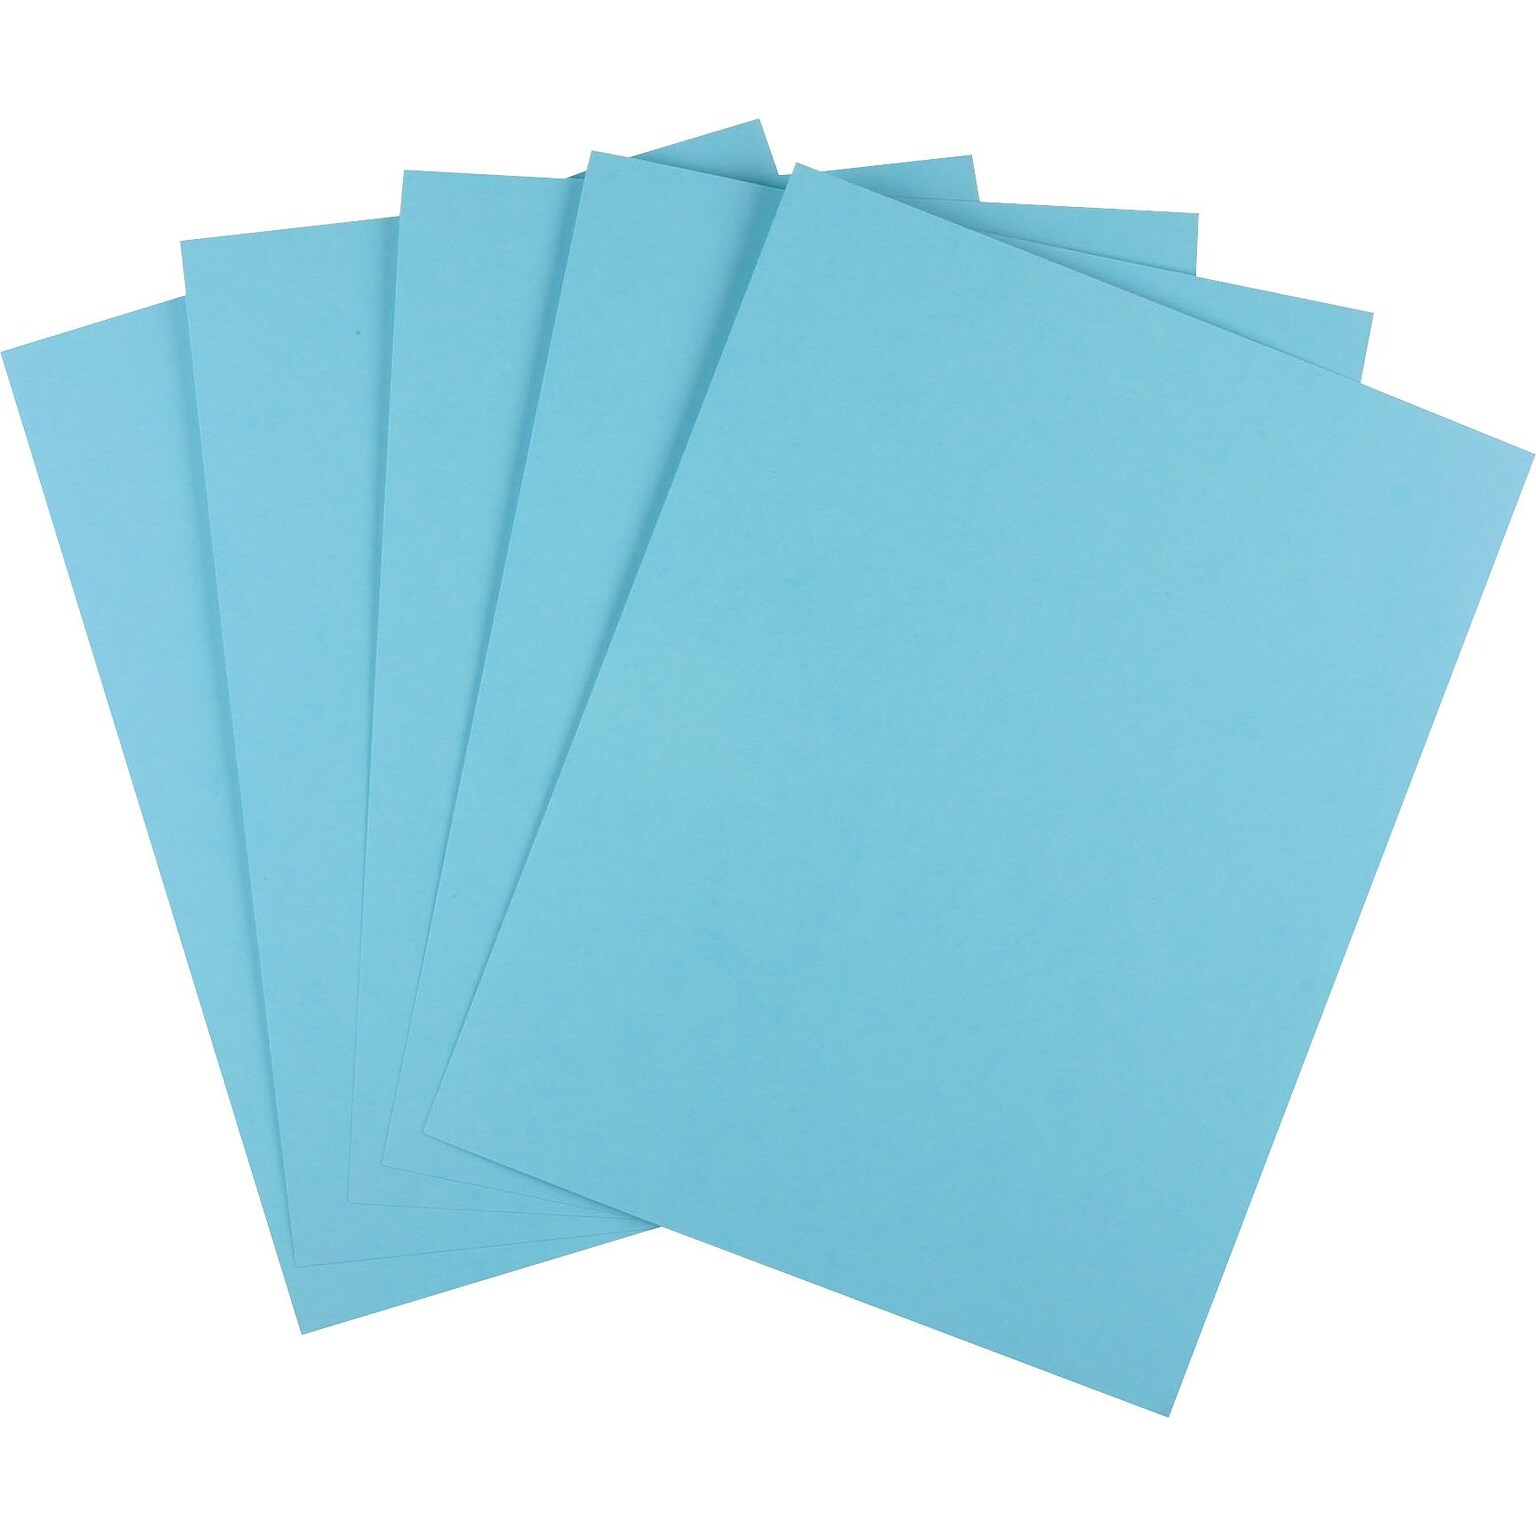 Staples Brights Multipurpose Colored Paper, 20 lbs., 8.5 x 11, Blue, 500 Sheets/Ream (25202)